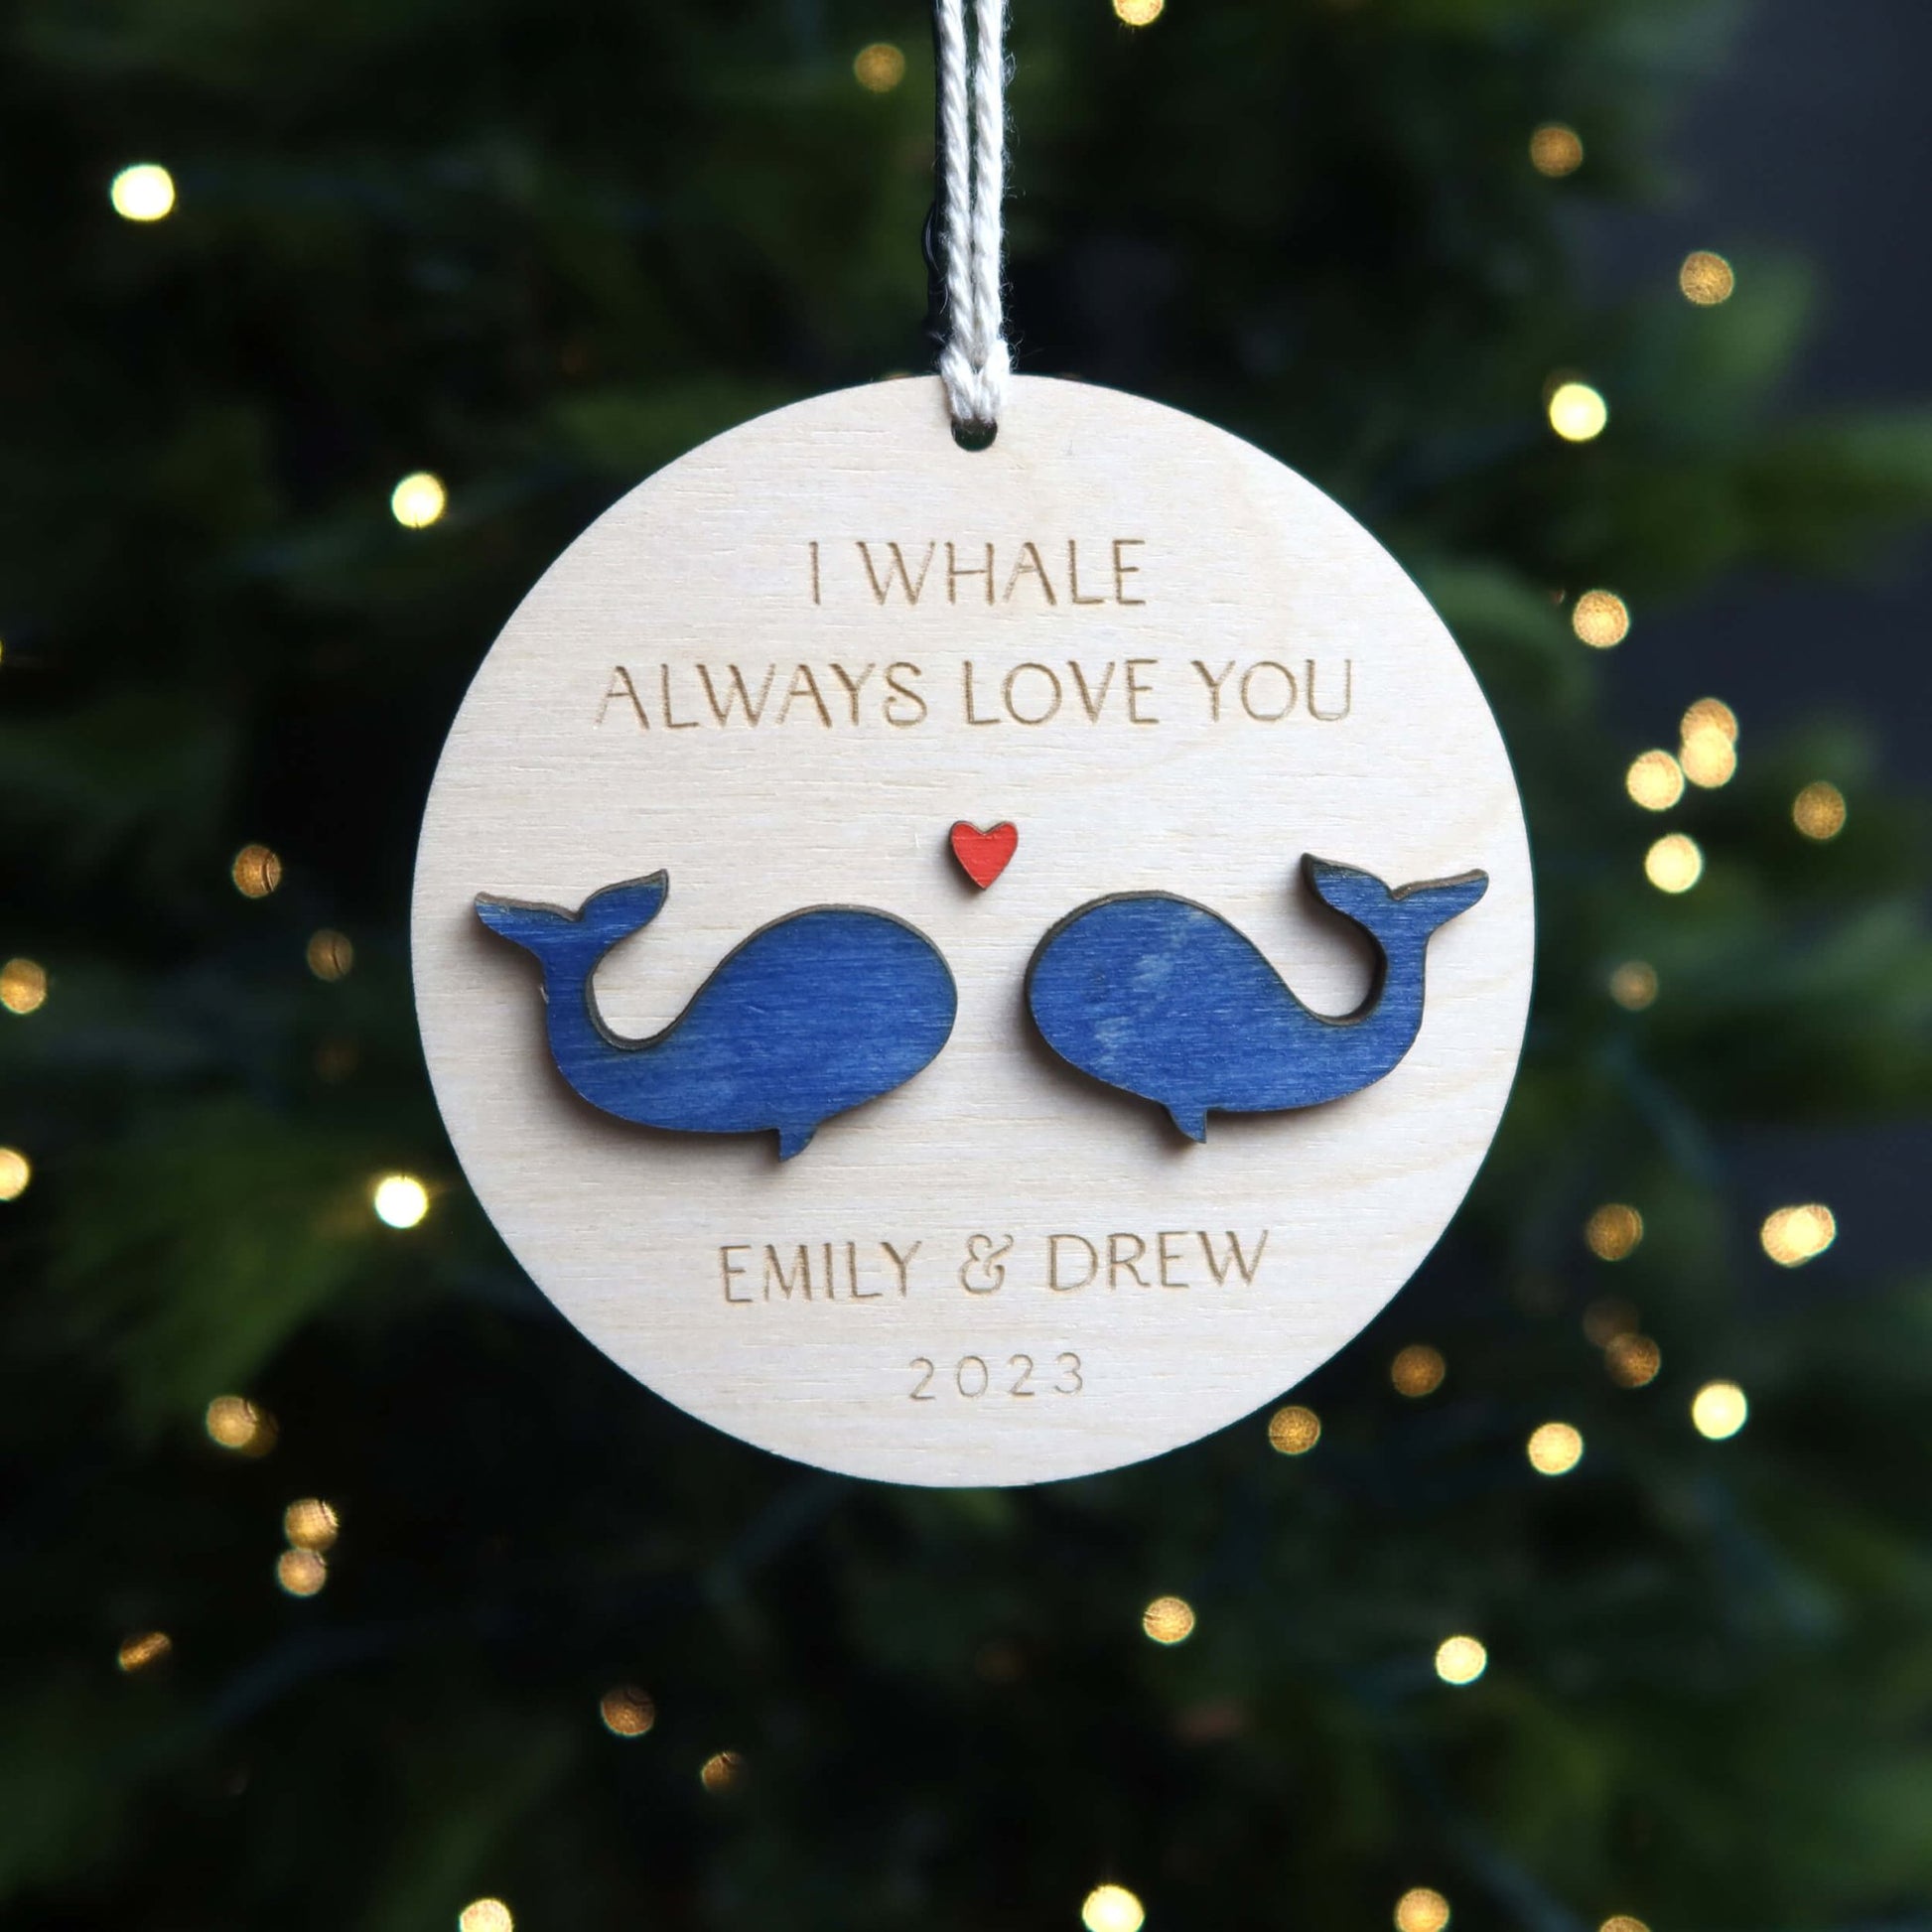 Memorial Gone Fishing Heart Personalized Circle Ornament